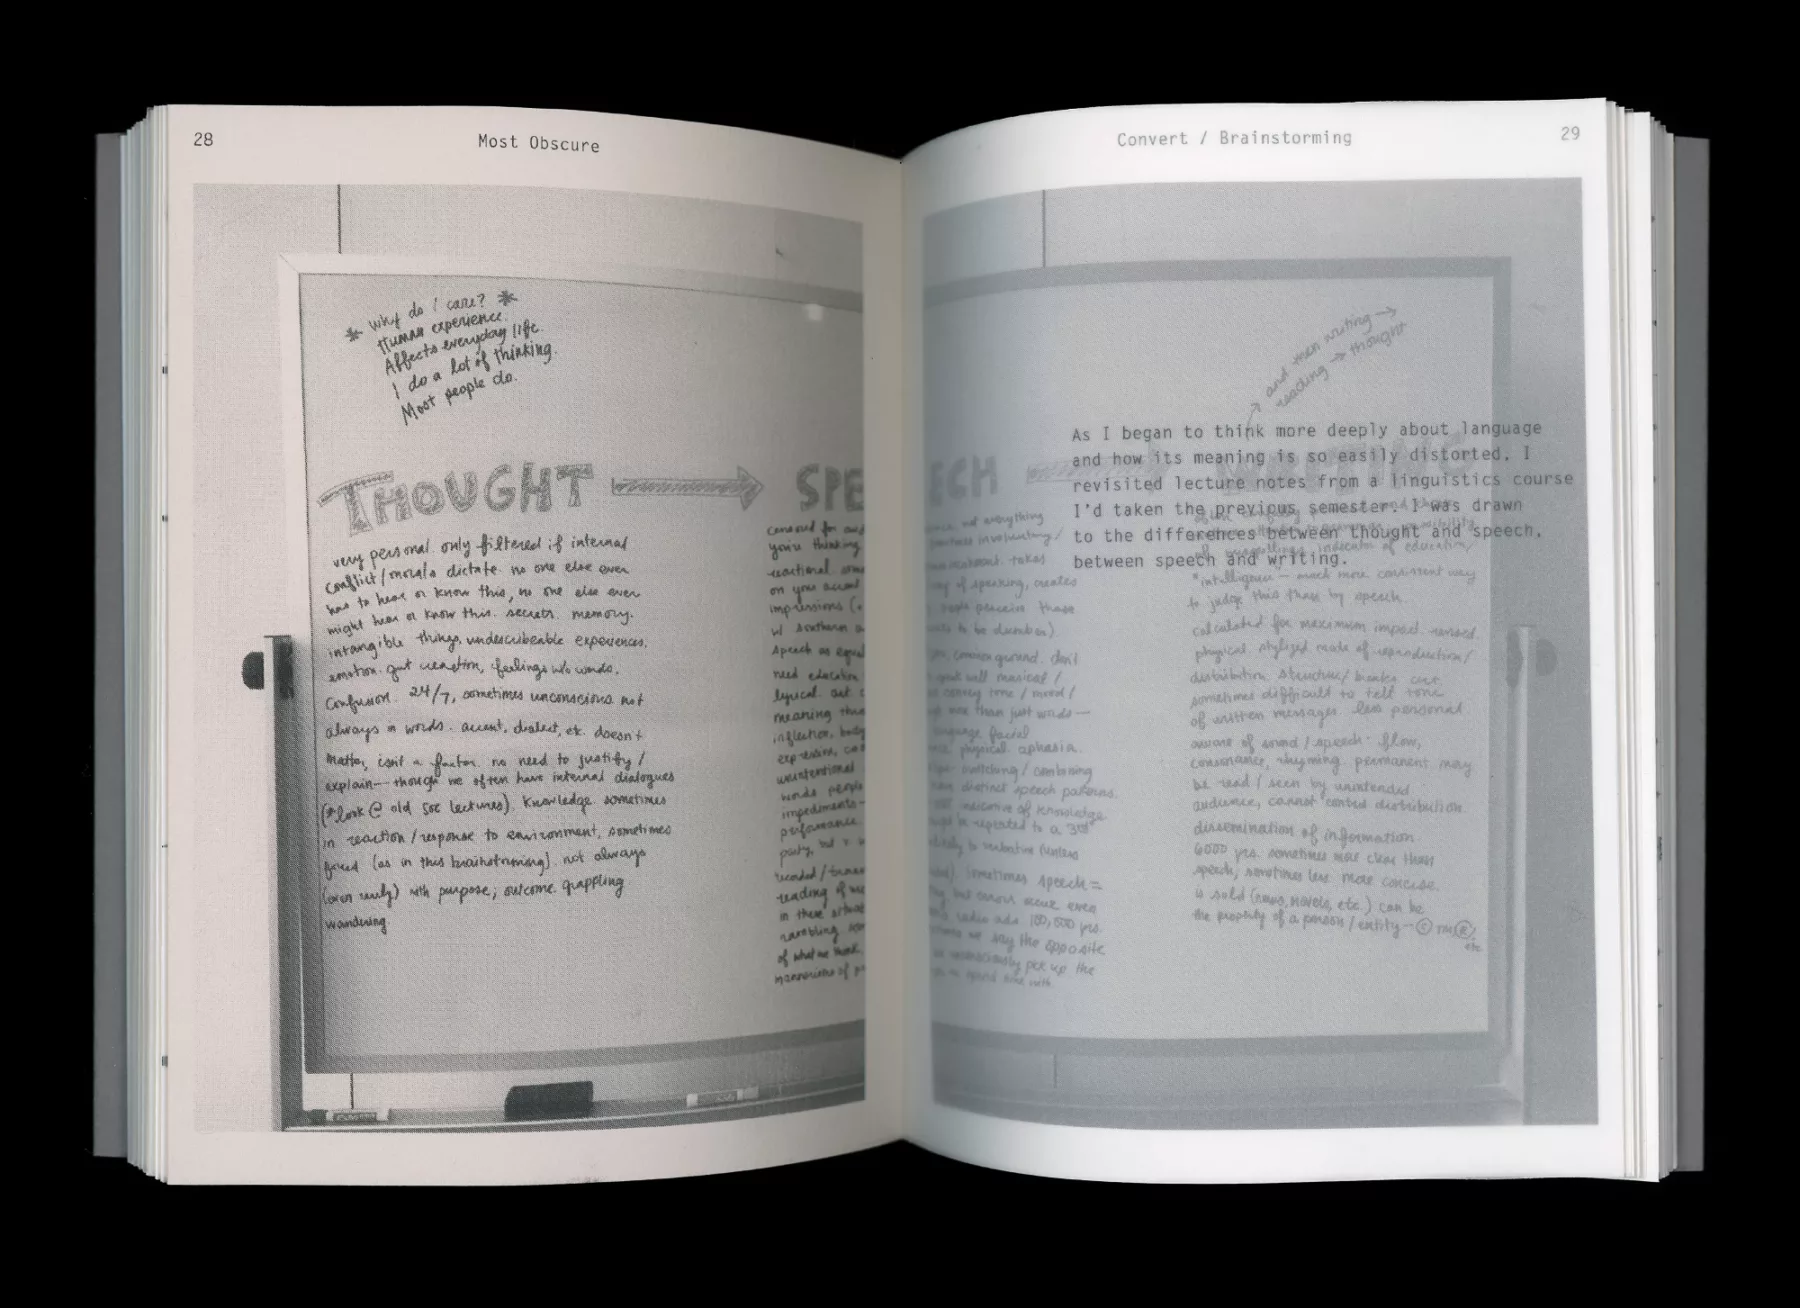 Spread of 'Most Obscure' book showing whiteboard with brainstorming about differences between thought, speech, and writing.